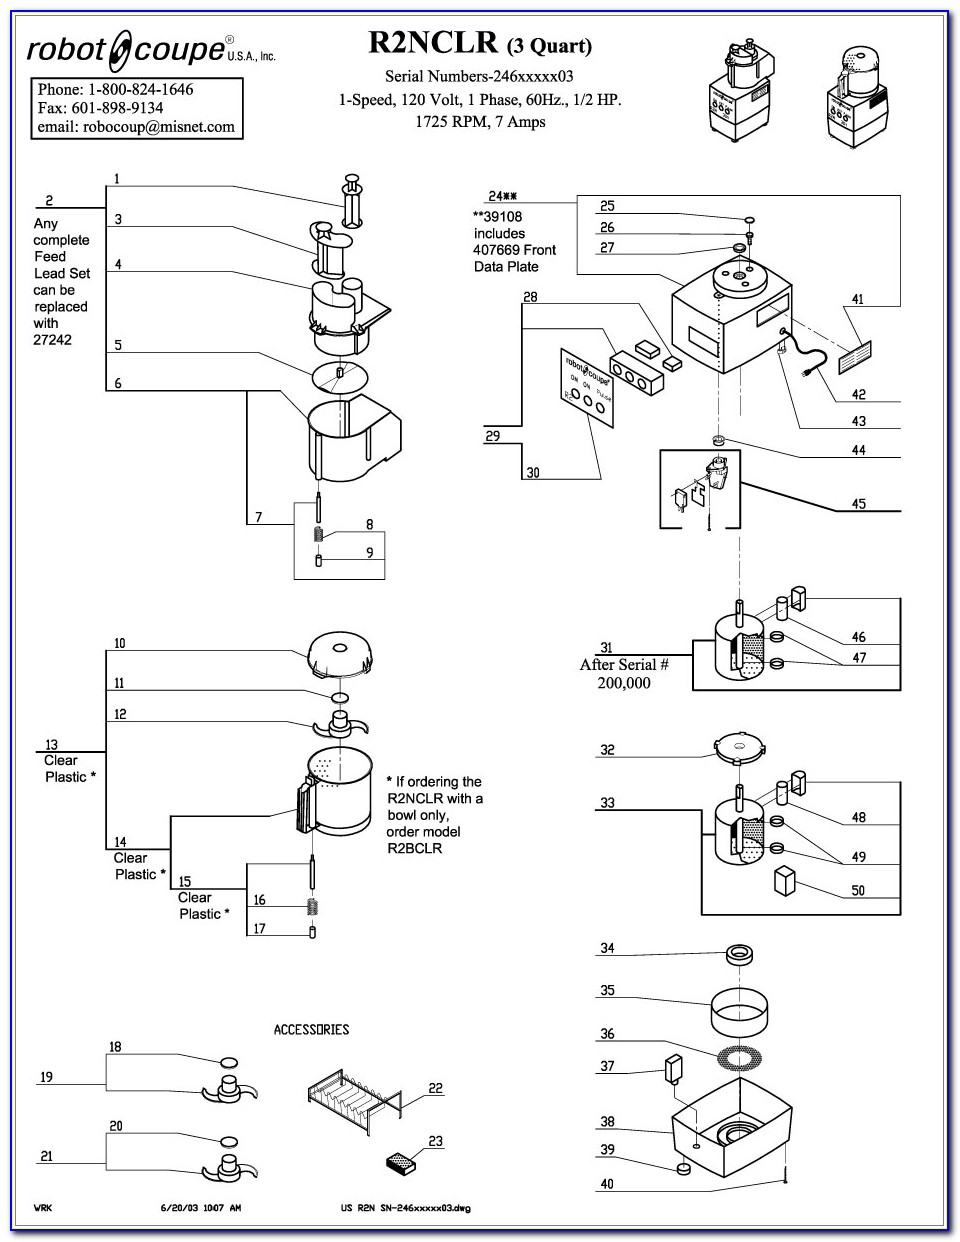 Robot Coupe R2 Dice Wiring Diagram